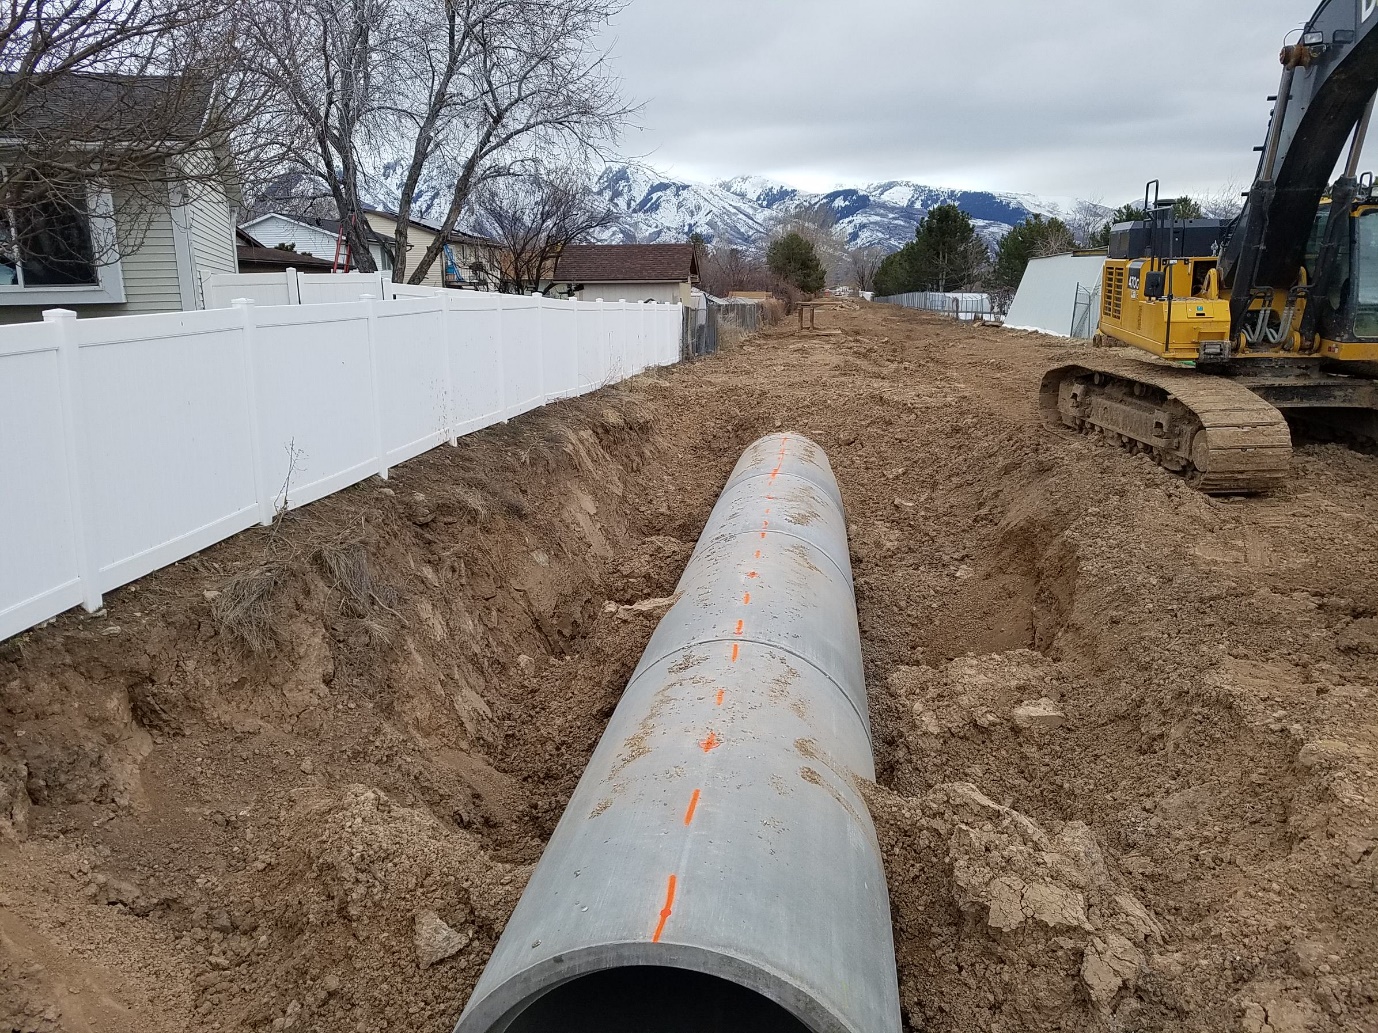 A pipe laying in dirt with a white fence on the left and an excavator on the right.